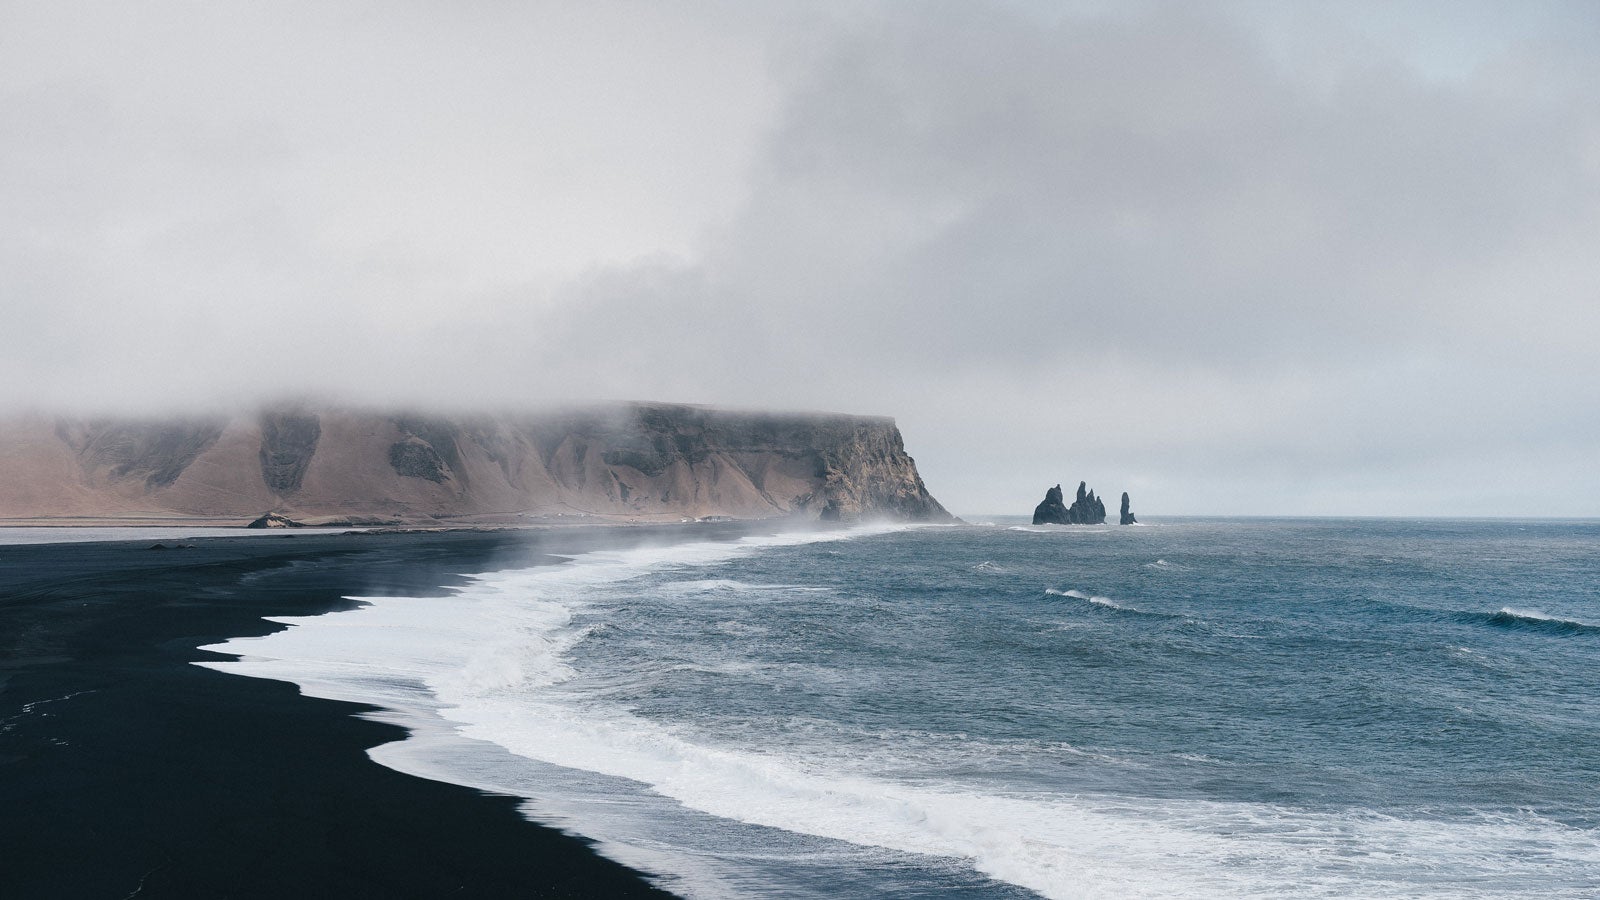 Icelandic beach with black sand and mist hanging over mountains in the far distance